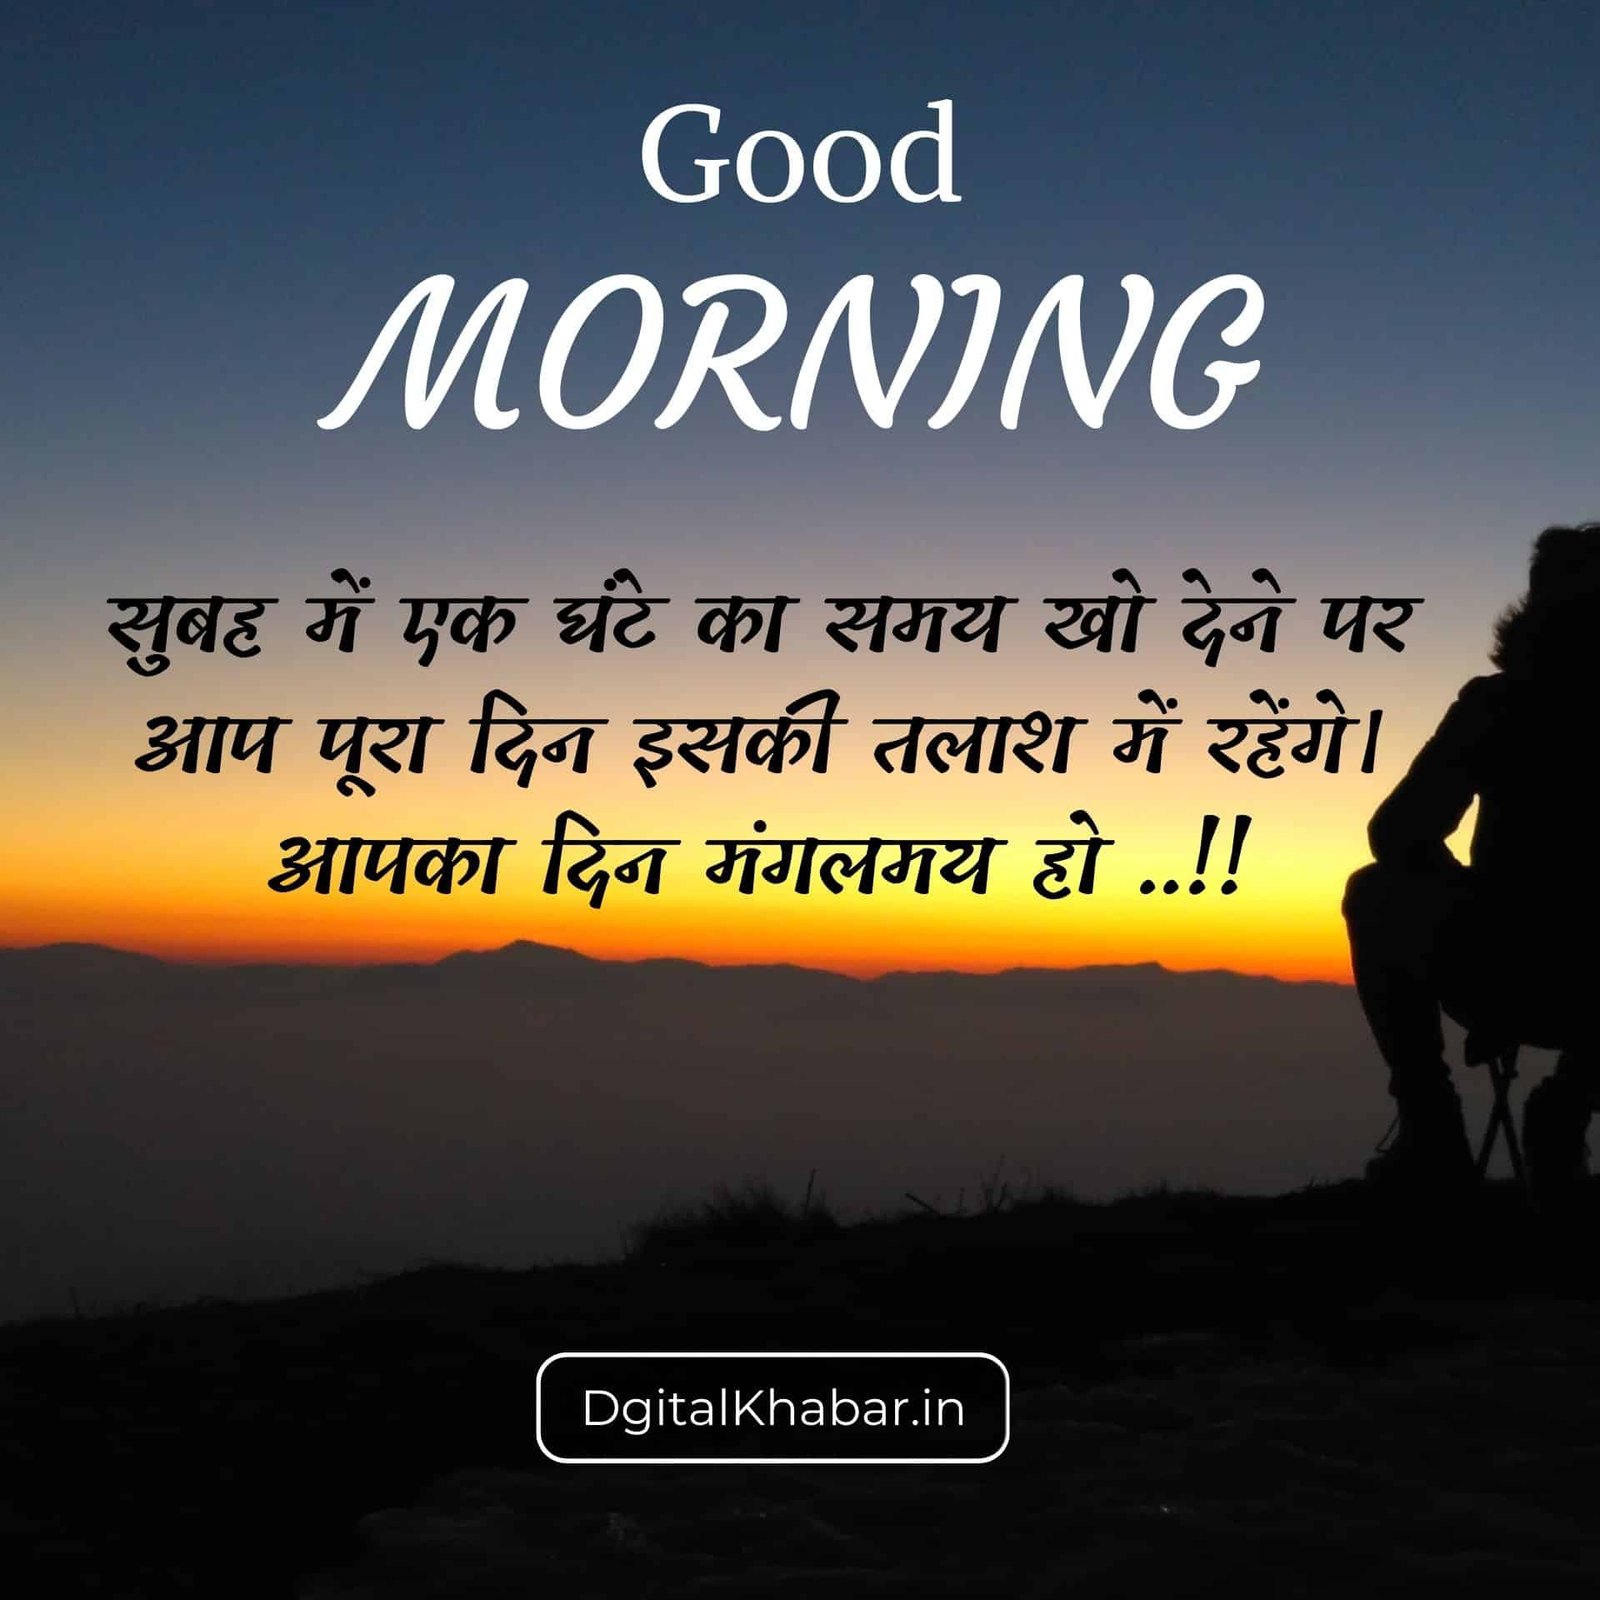 good morning quotes inspirational in hindi text